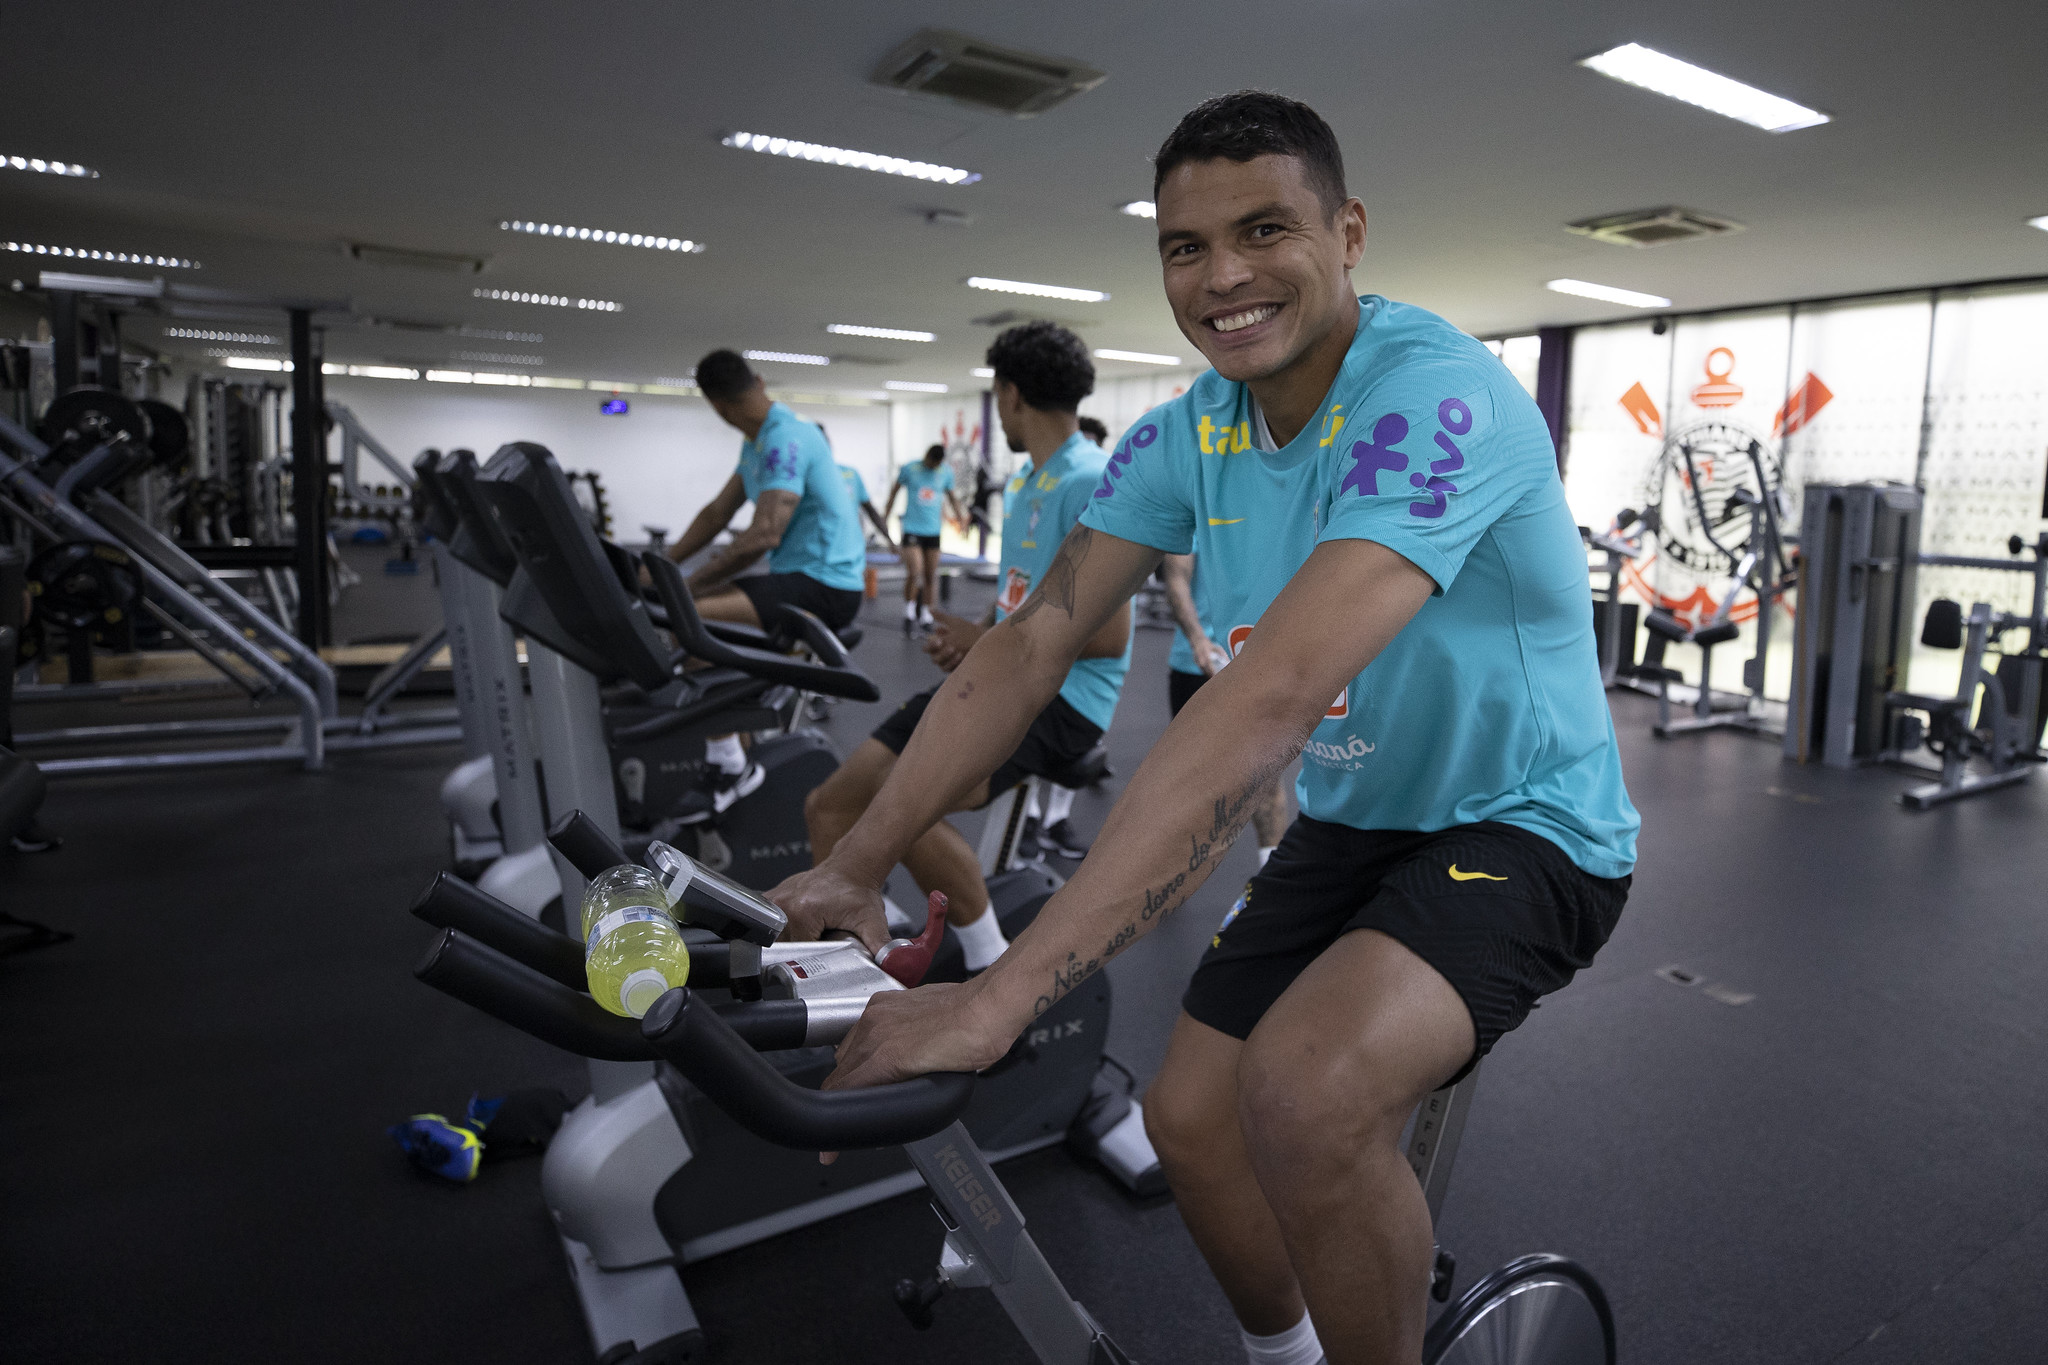 Brazil vs Colombia LIVE: 37-year-old Thiago Silva at Brazil training before Colombia match